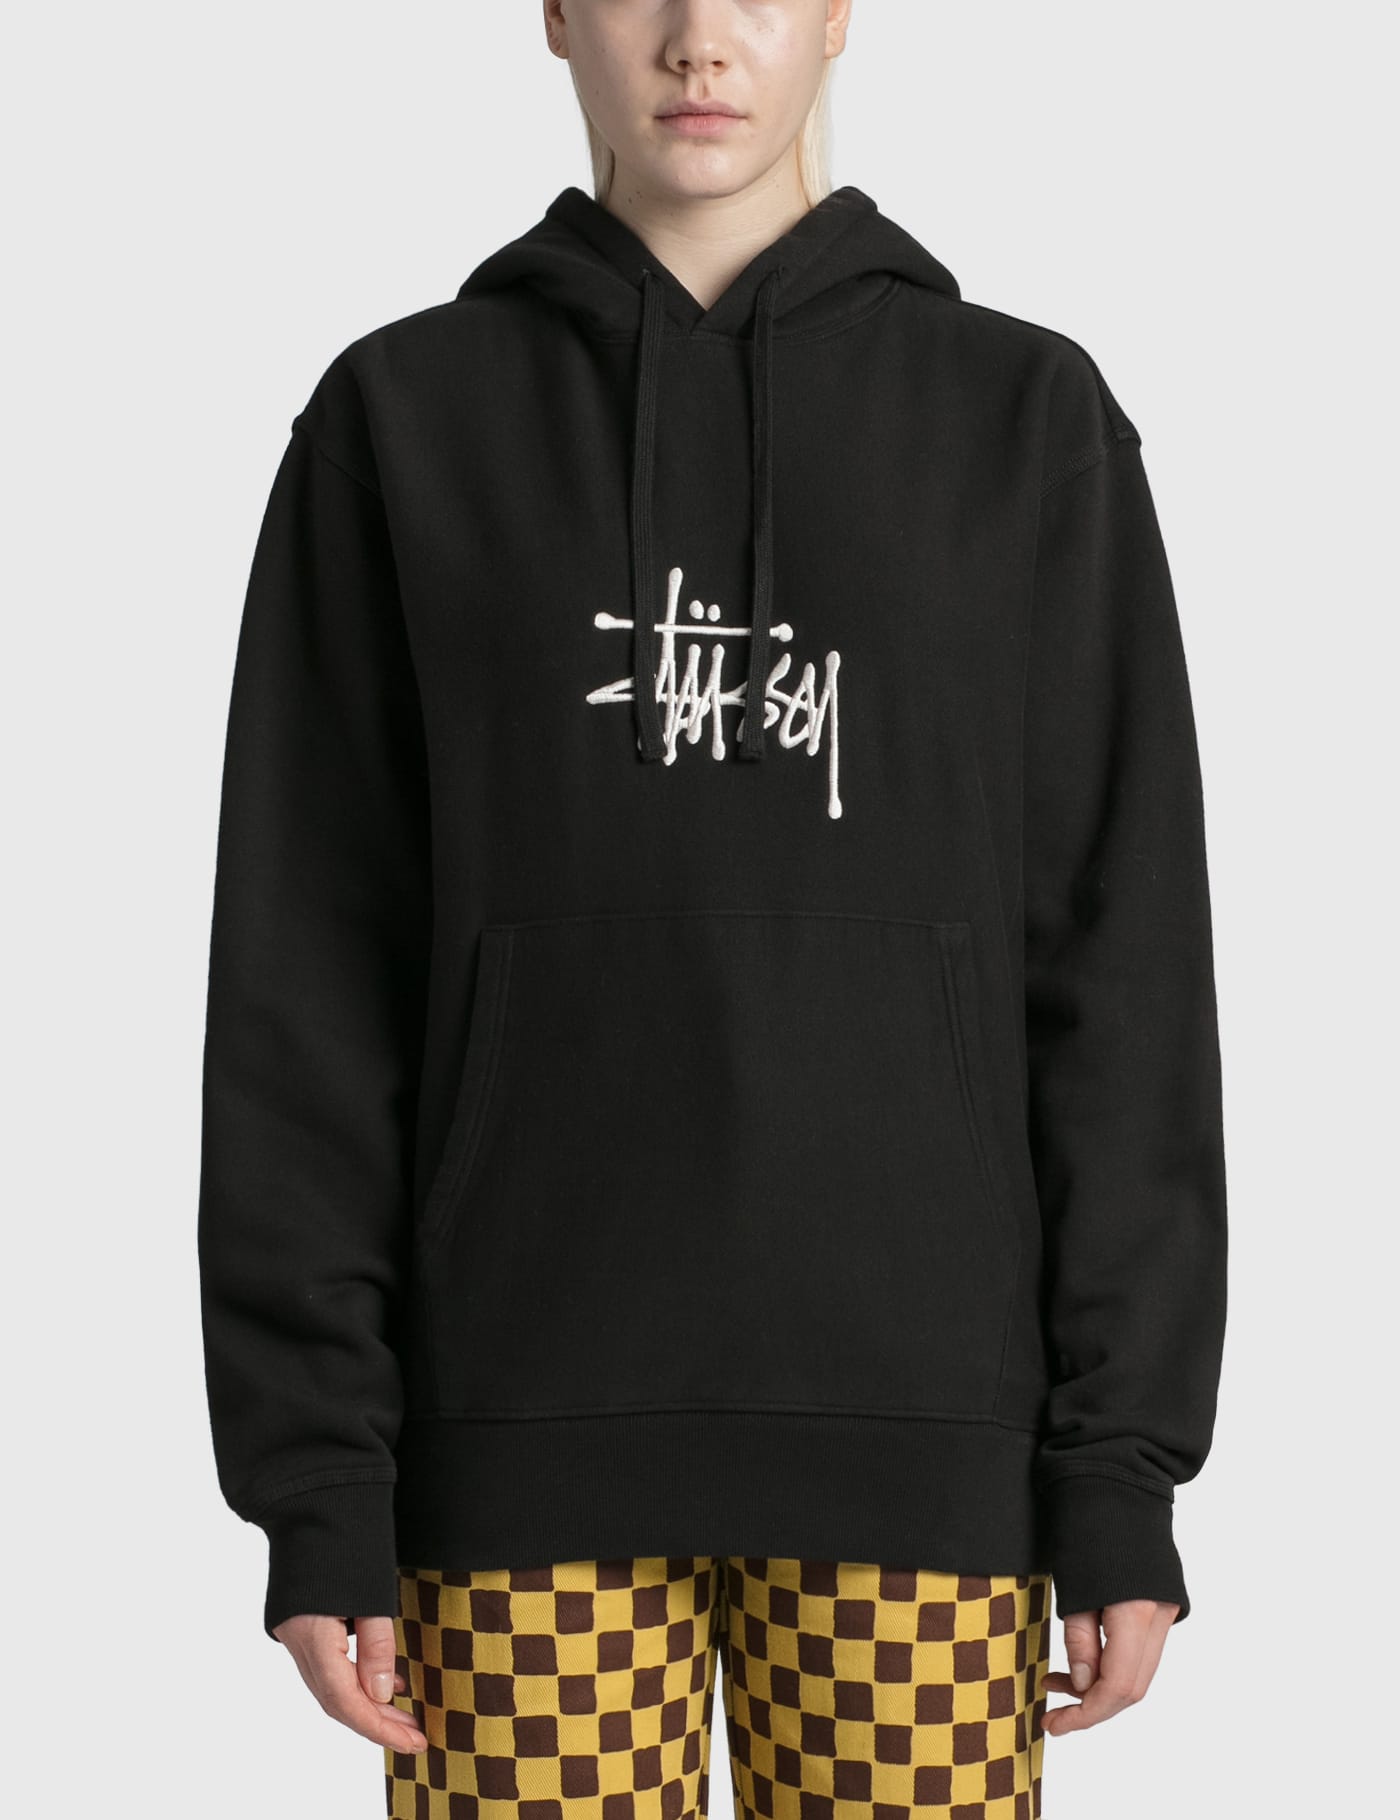 Stussy | HBX - Globally Curated Fashion and Lifestyle by Hypebeast